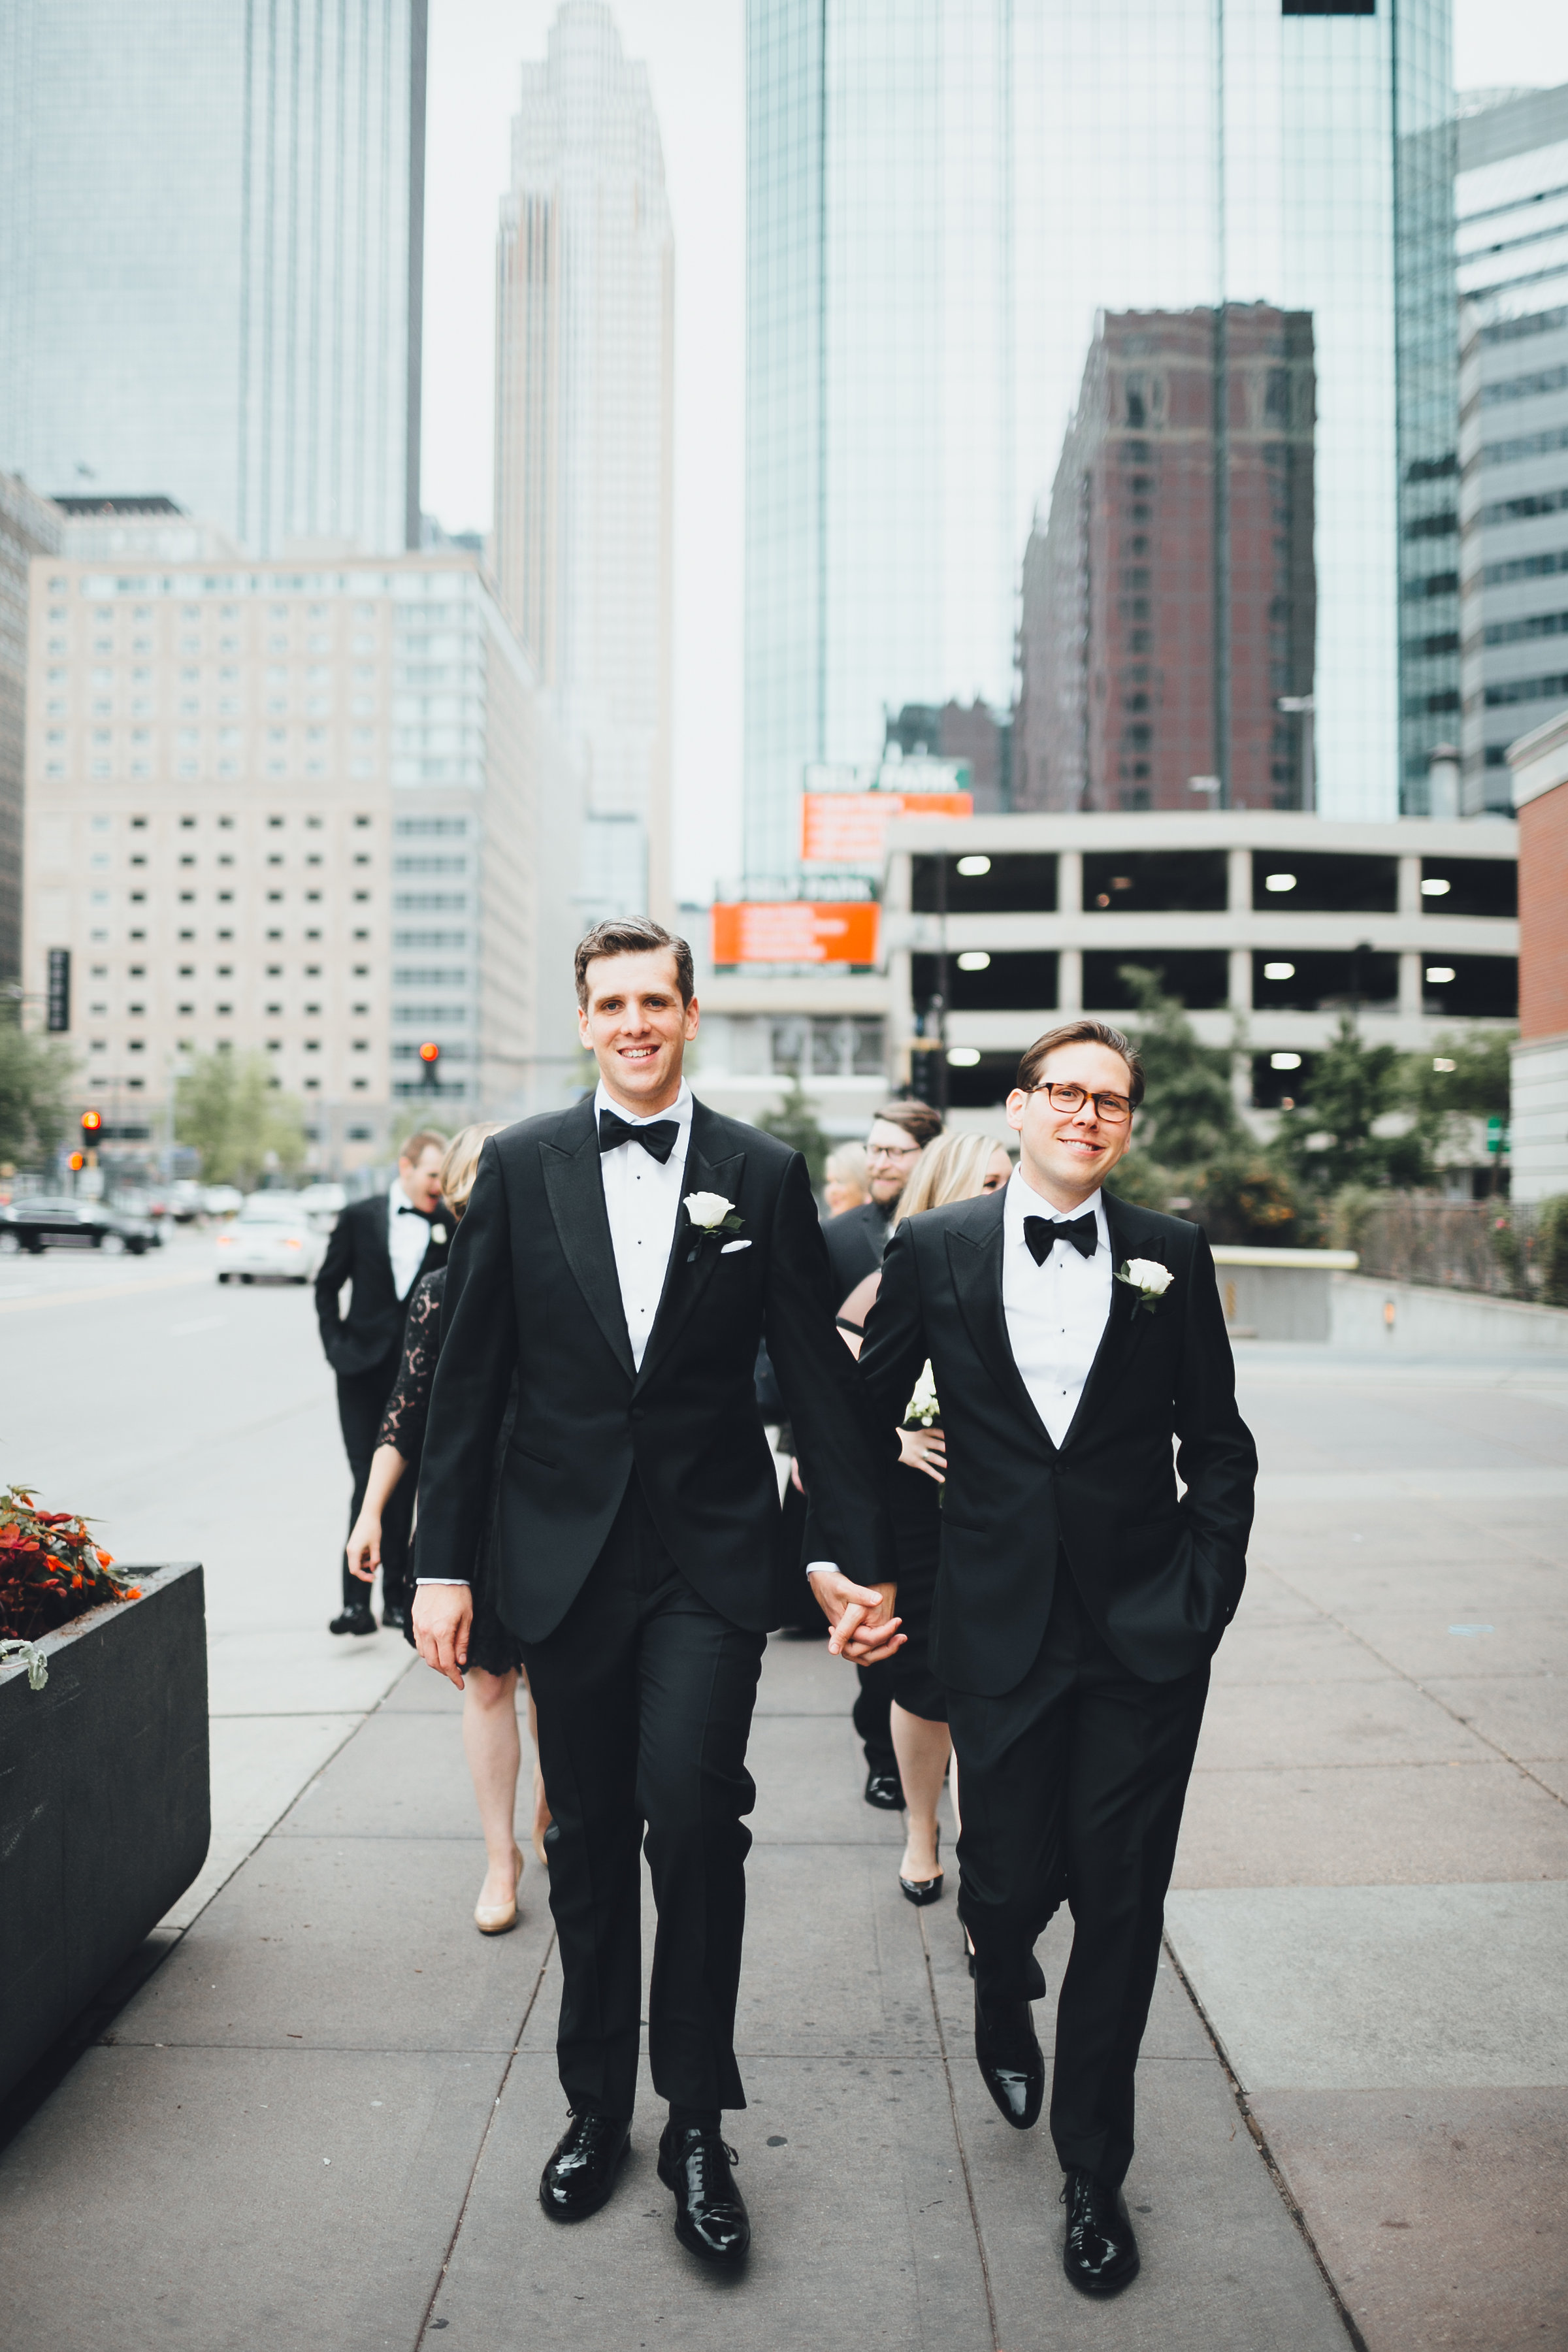 Grooms holding hands walking downtown